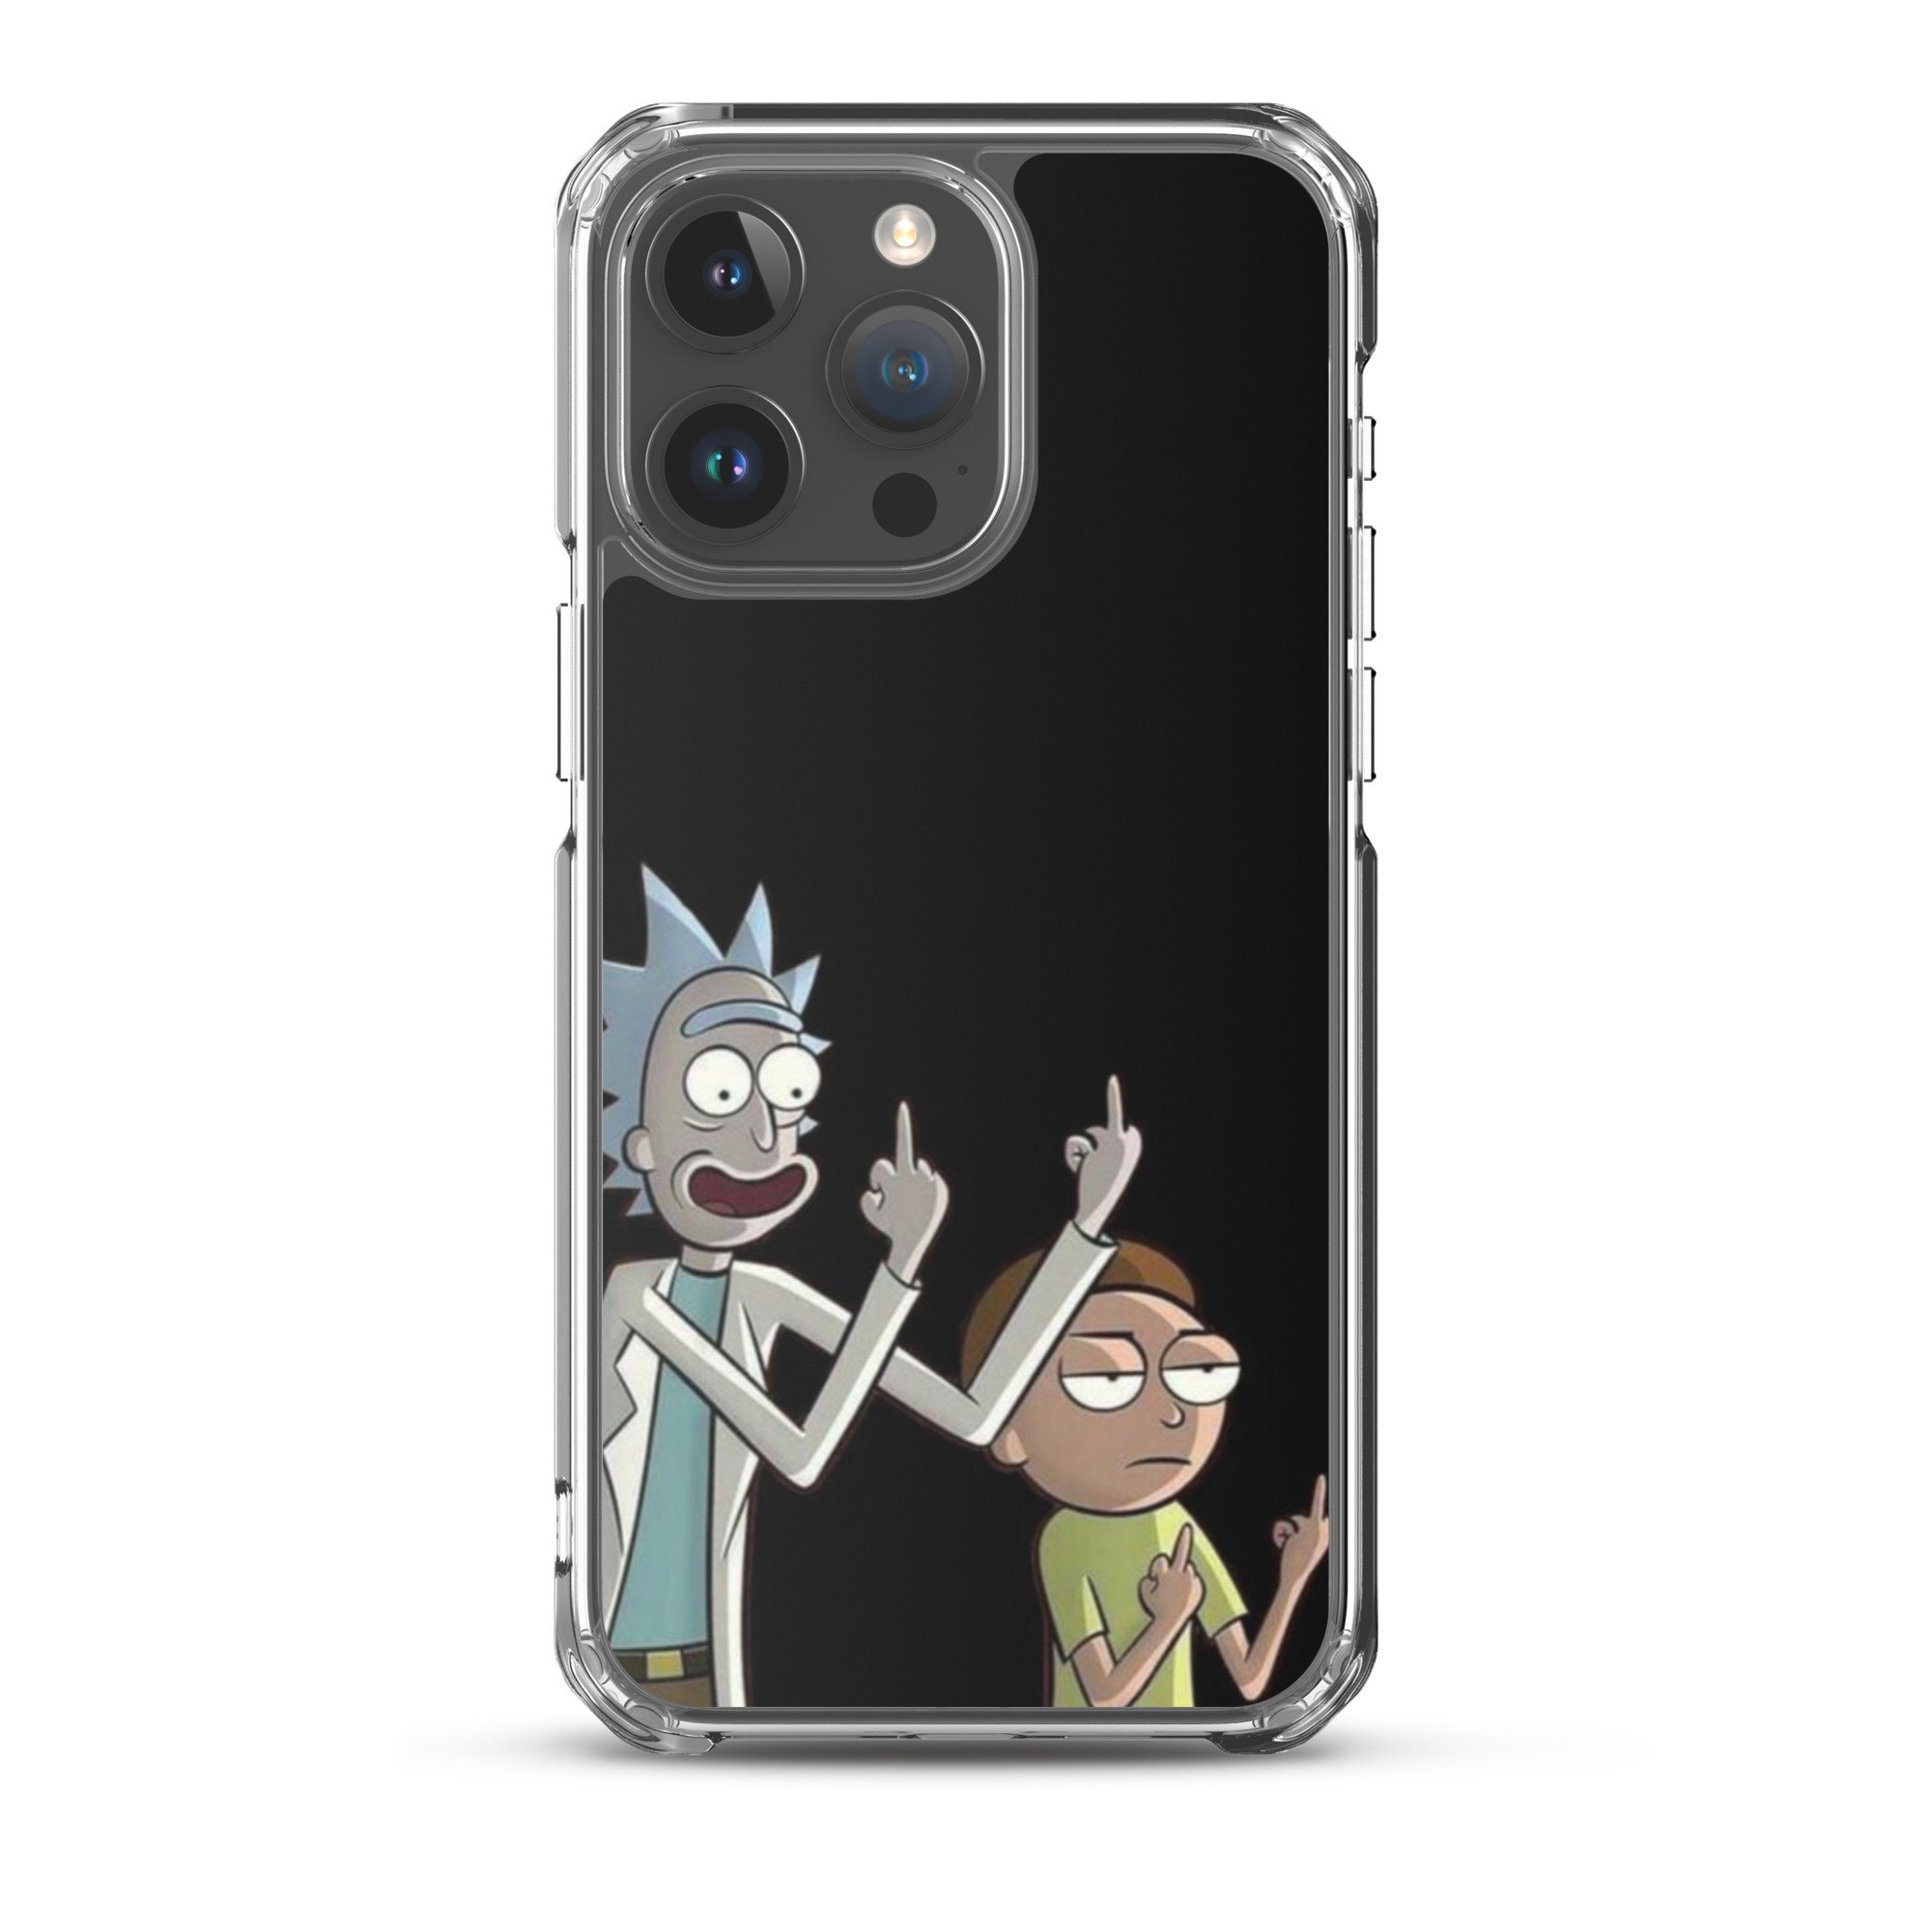 Rick and Morty Cell Phone Wallpaper, iOS 14 Aesthetic, iOS14, Phone  Background, Android iPad Theme, Cartoon Network Science Fiction